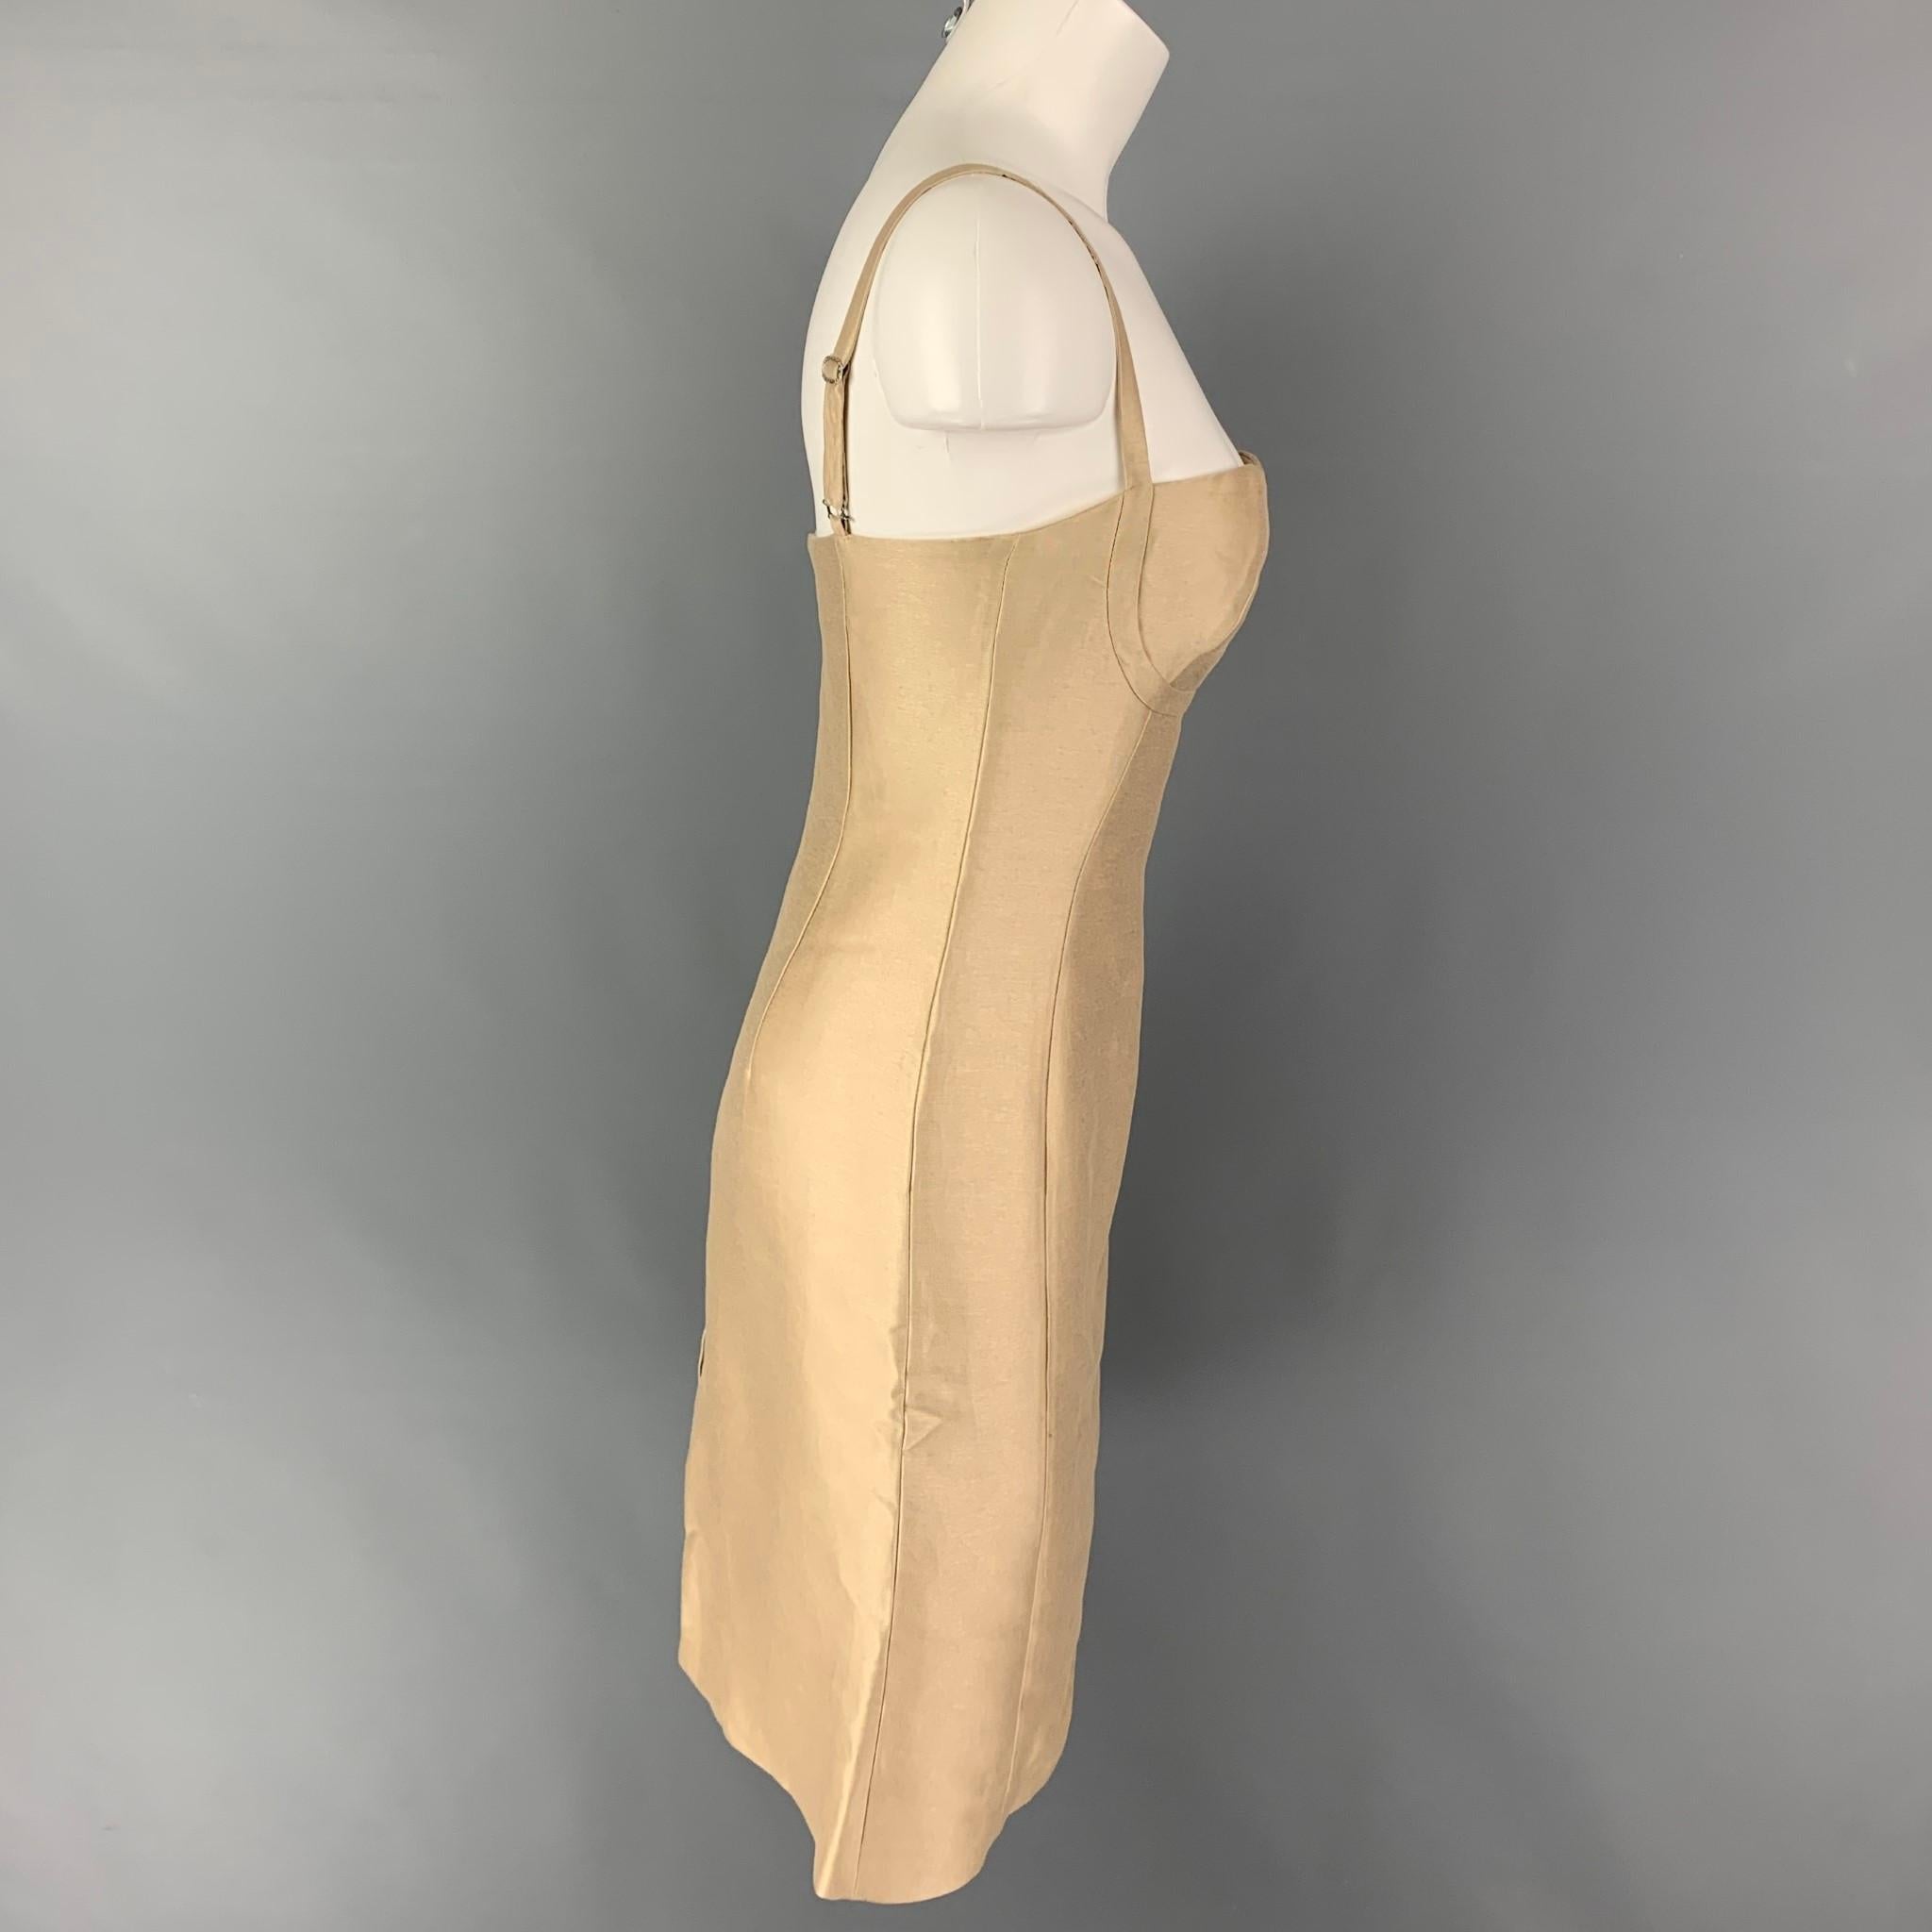 VERSUS by GIANNI VERSACE dress comes in a champagne cotton / silk featuring spaghetti straps, back slit, and a back zipper closure. Made in Italy. 

Very Good Pre-Owned Condition.
Marked: 26/40

Measurements:

Bust: 30 in.
Waist: 28 in.
Hip: 34